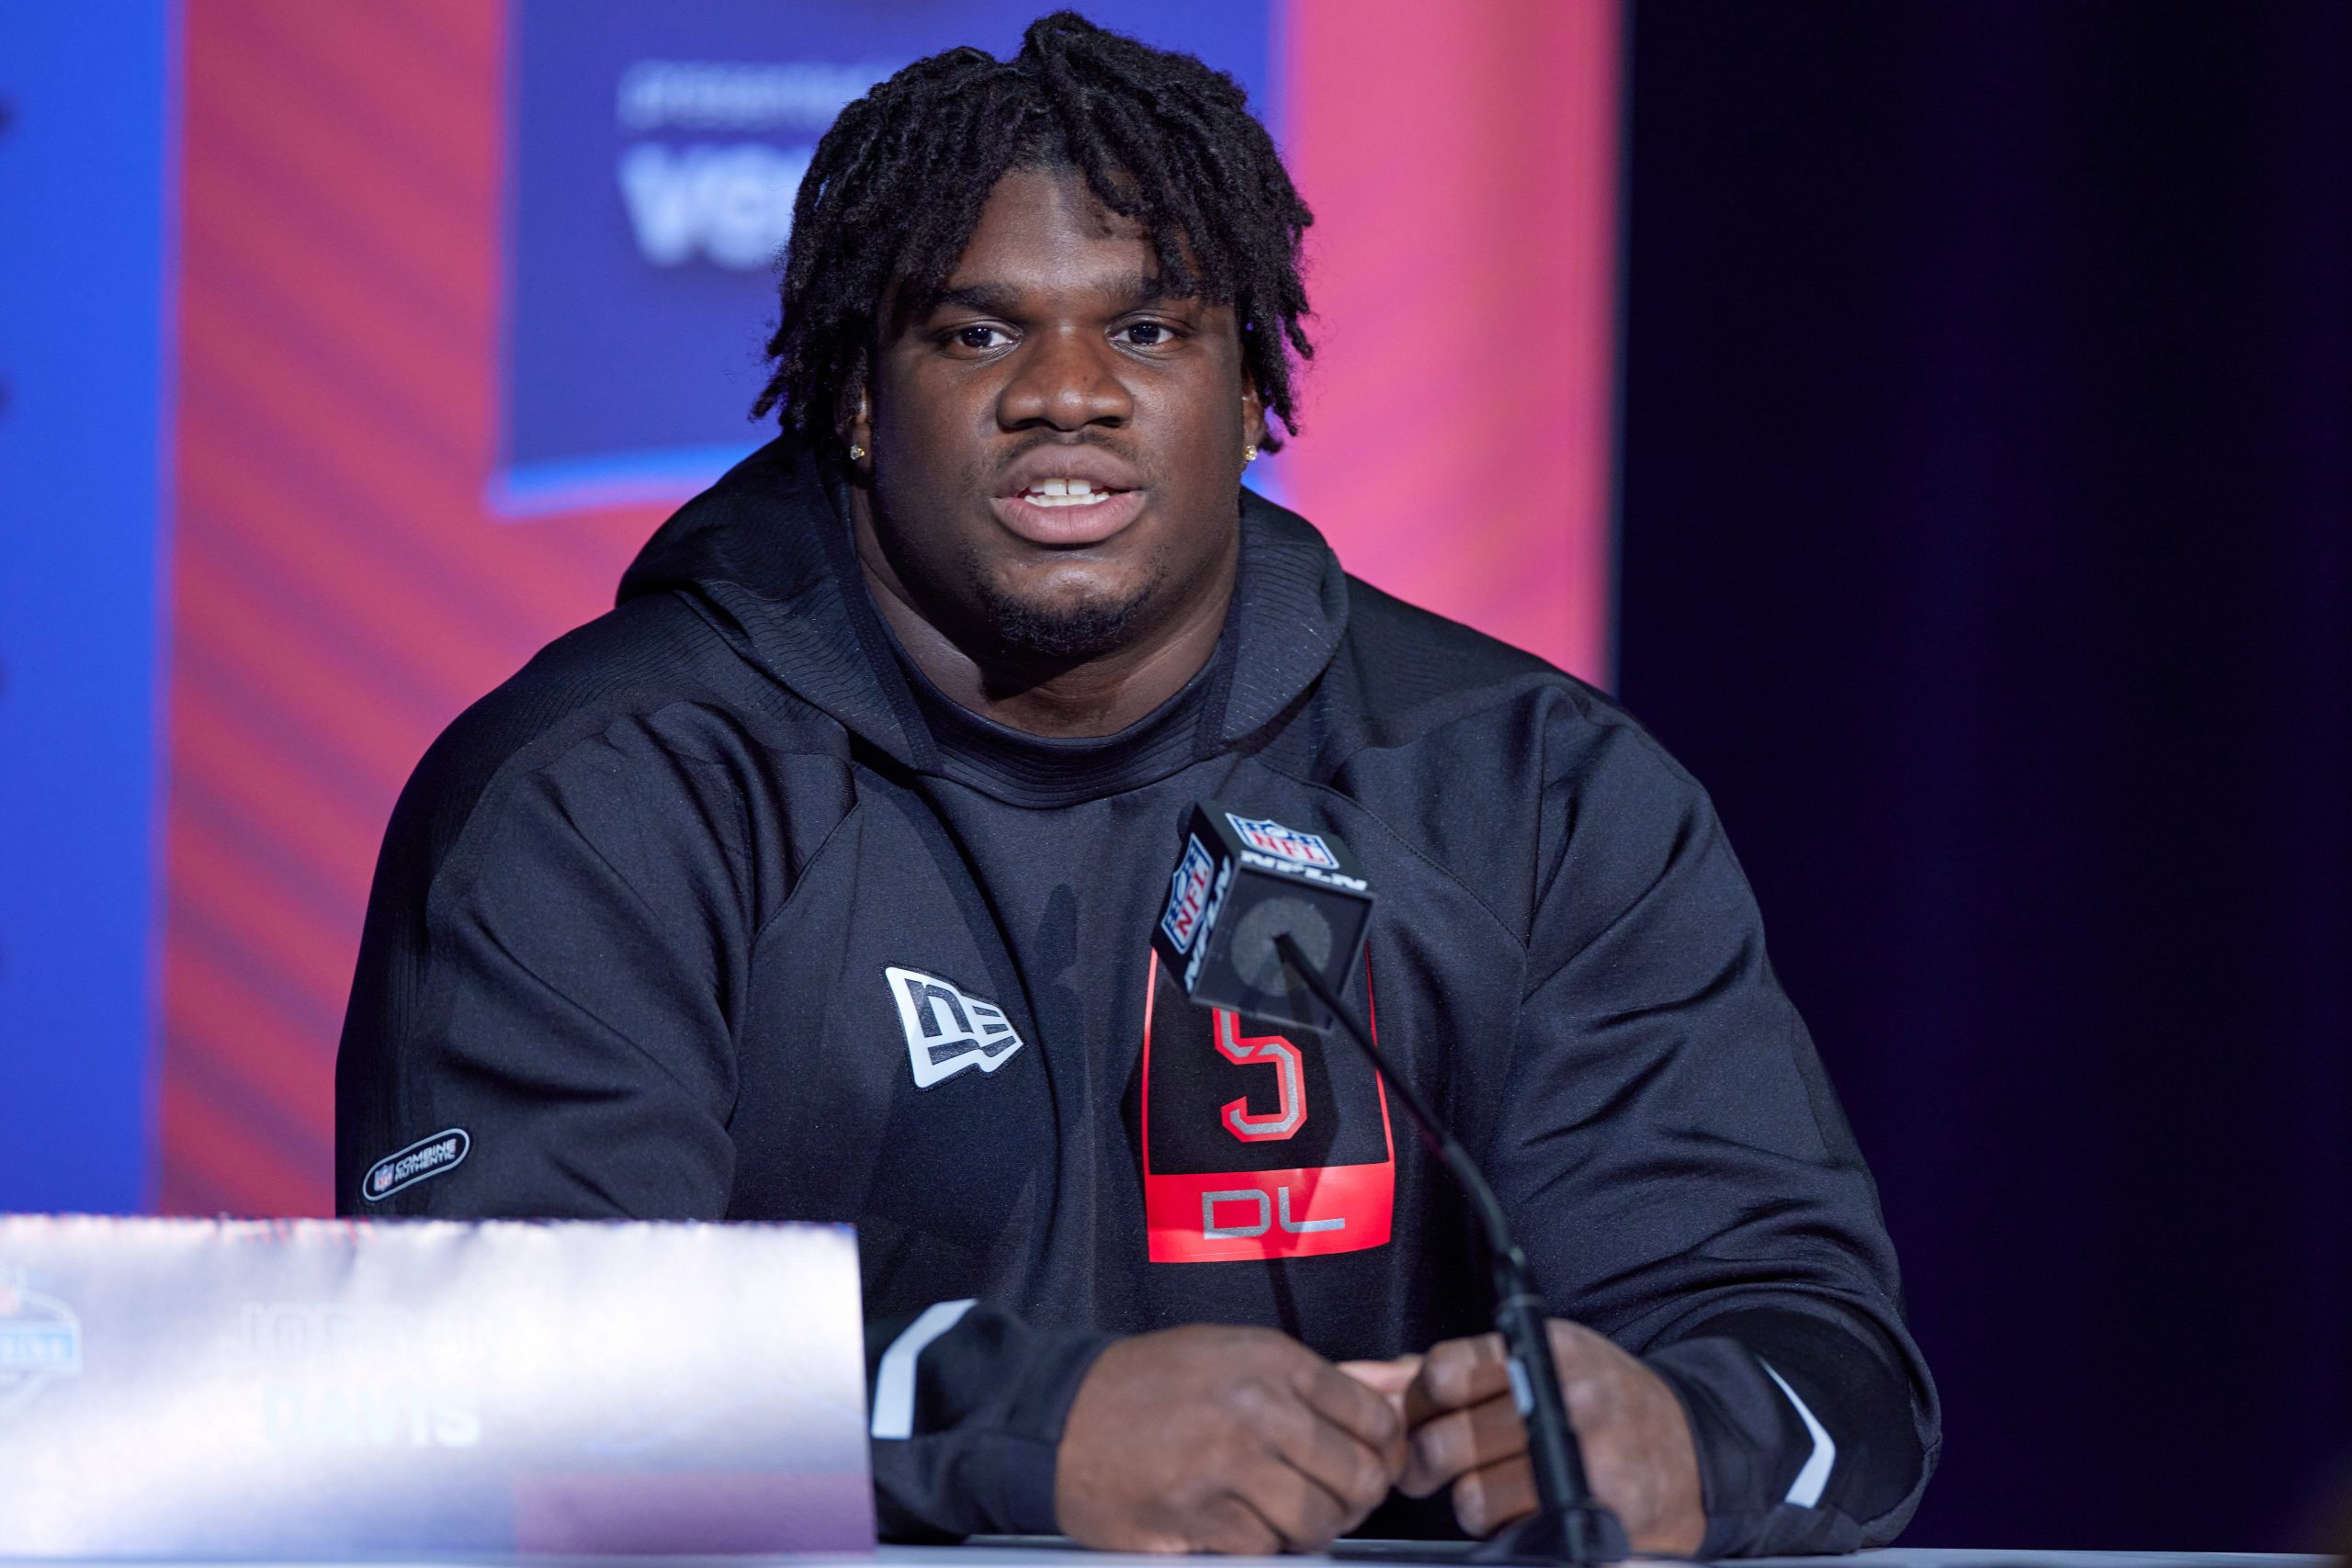 INDIANAPOLIS, IN - MARCH 04: Georgia defensive lineman Jordan Davis answers questions from the media during the NFL, American Football Herren, USA Scouting Combine on March 4, 2022, at the Indiana Convention Center in Indianapolis, IN. Photo by Robin Alam/Icon Sportswire NFL: MAR 04 Scouting Combine Icon164220304158